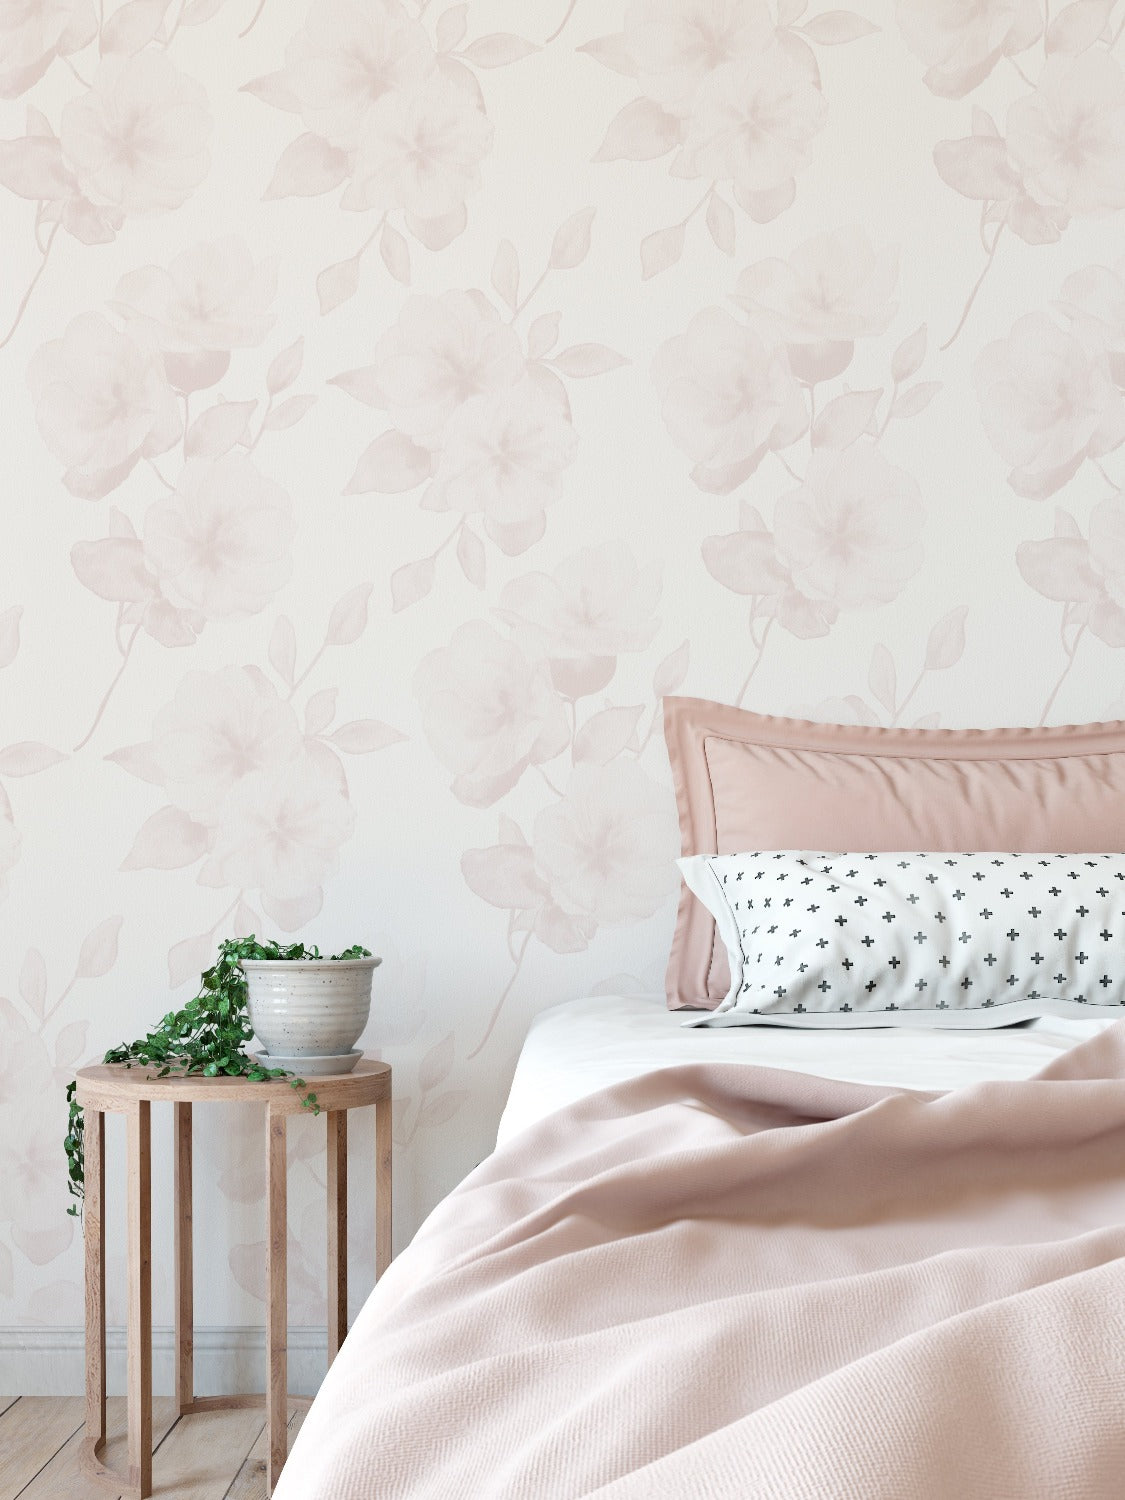 This photo depicts a bedroom interior dressed with the Minimal Floral Wallpaper V on the wall. The wallpaper adds a subtle, elegant touch with its watercolor blush flowers complementing the pastel bedding and wooden bedside table.